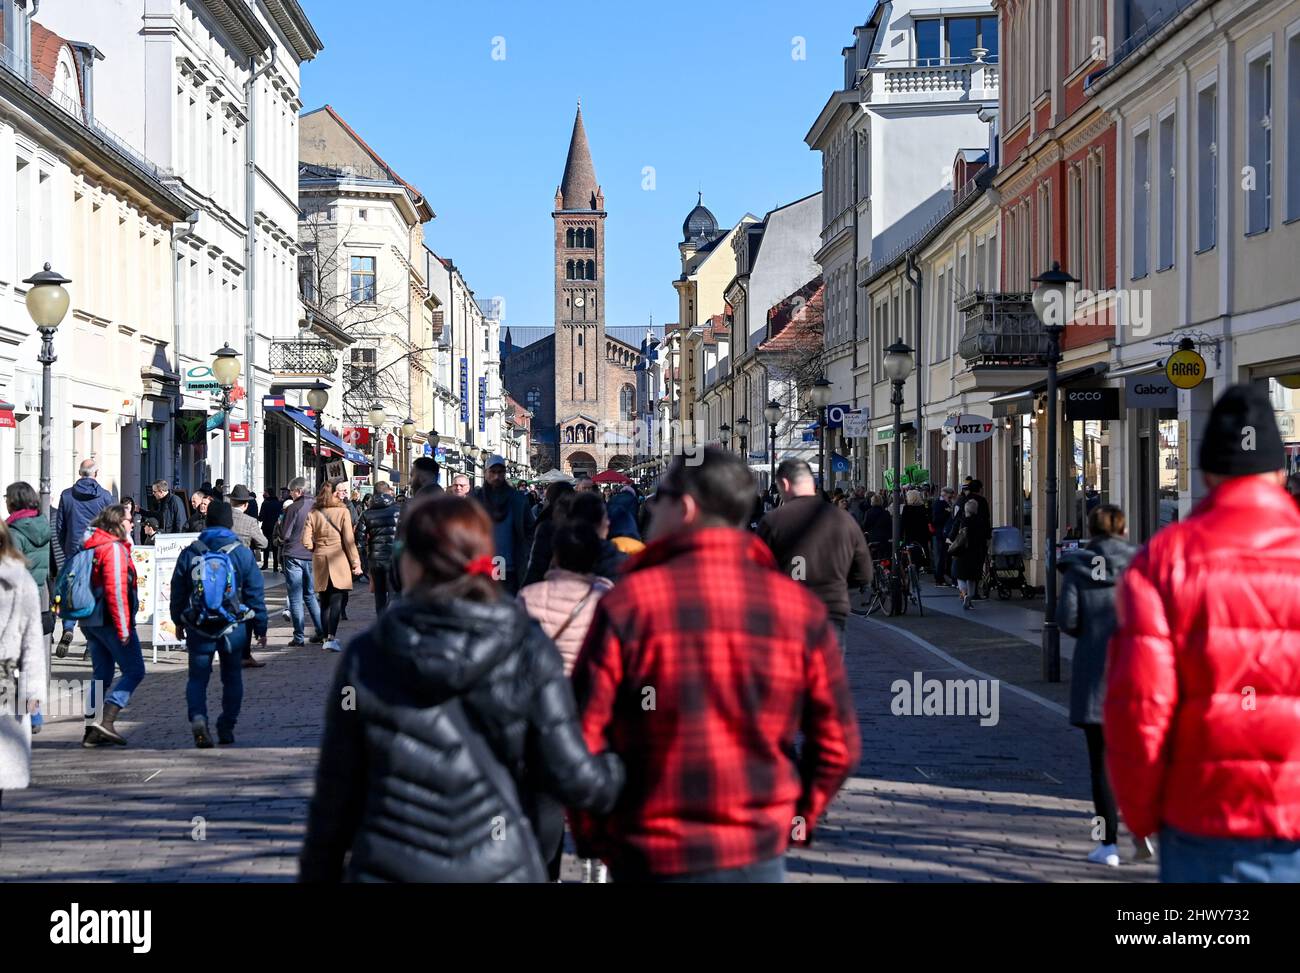 Potsdam, Germany. 08th Mar, 2022. Many tourists walk in Potsdam's city  center on Brandenburger Straße with numerous cafes and stores. Since in  Berlin March 8 is a holiday with closed stores, many